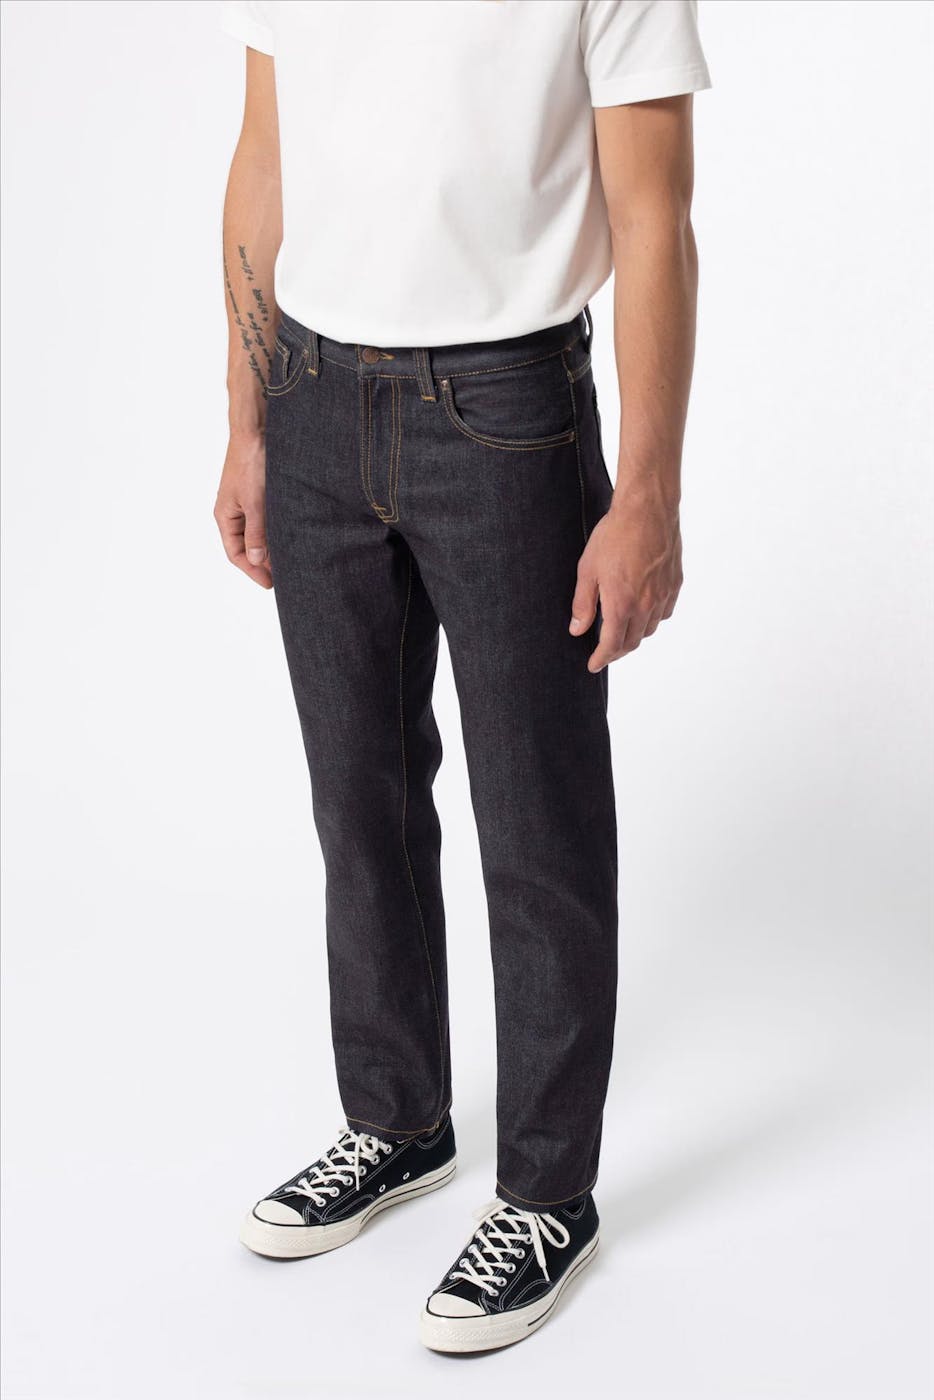 Nudie Jeans Co. - Indigoblauwe Gritty Jackson straight jeans